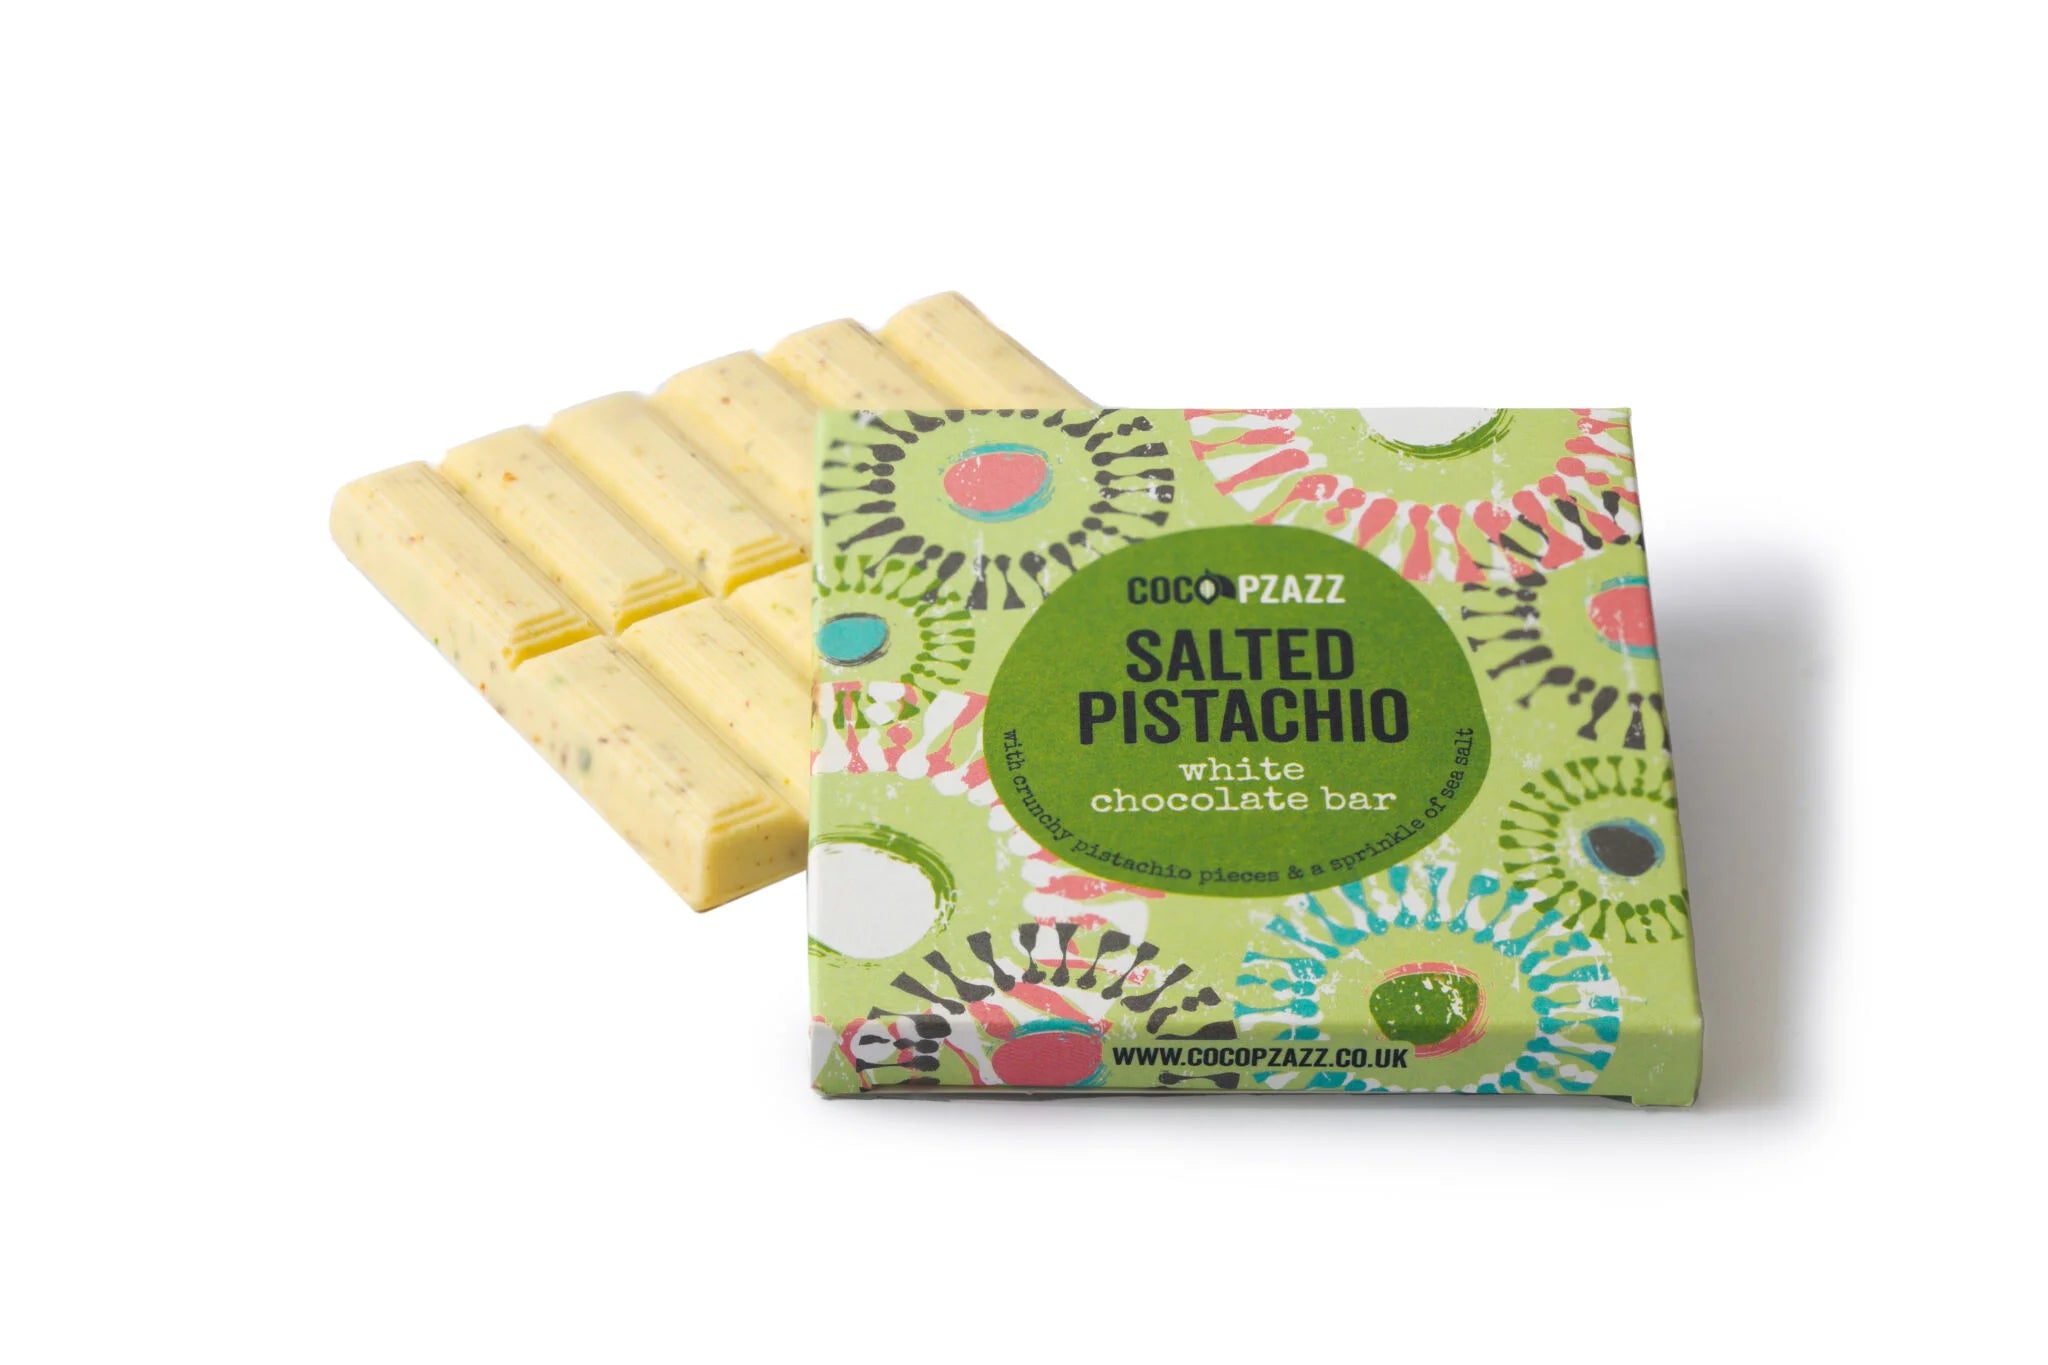 Salted Pistachio and White Chocolate Bar by Coco Pzazz